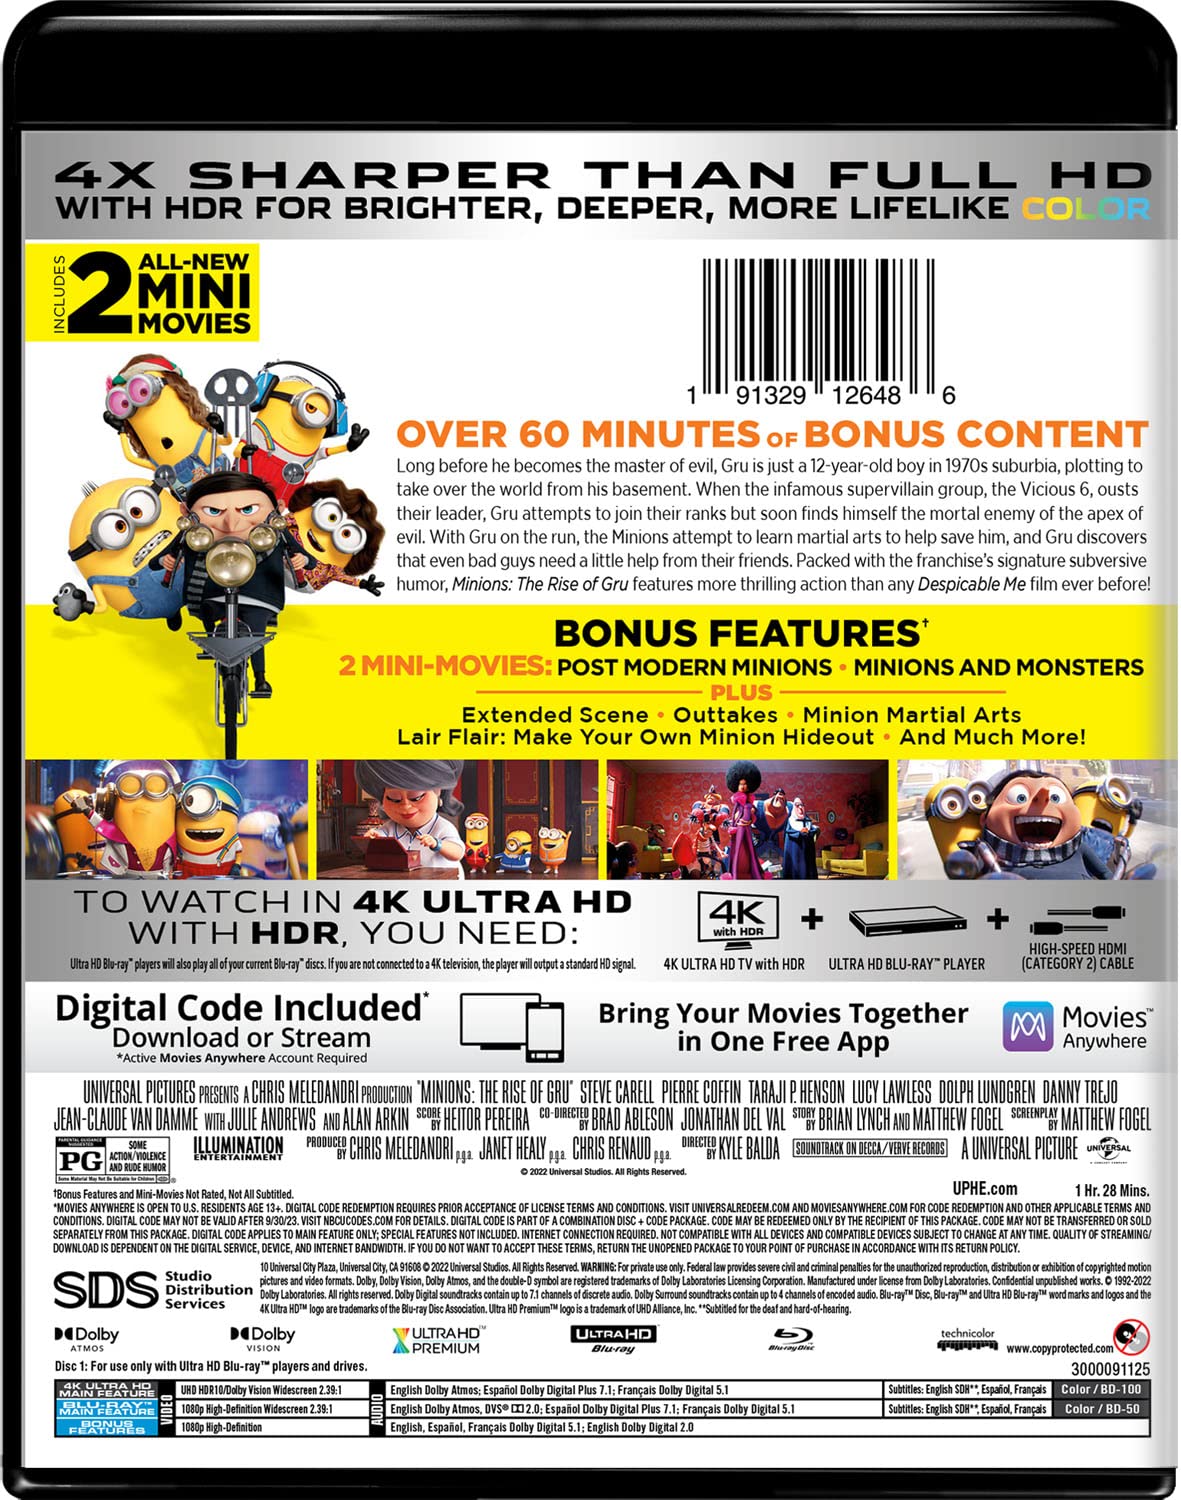 Minions- The Rise of Gru 4k Blu-ray Collectors Edition Official Reverse